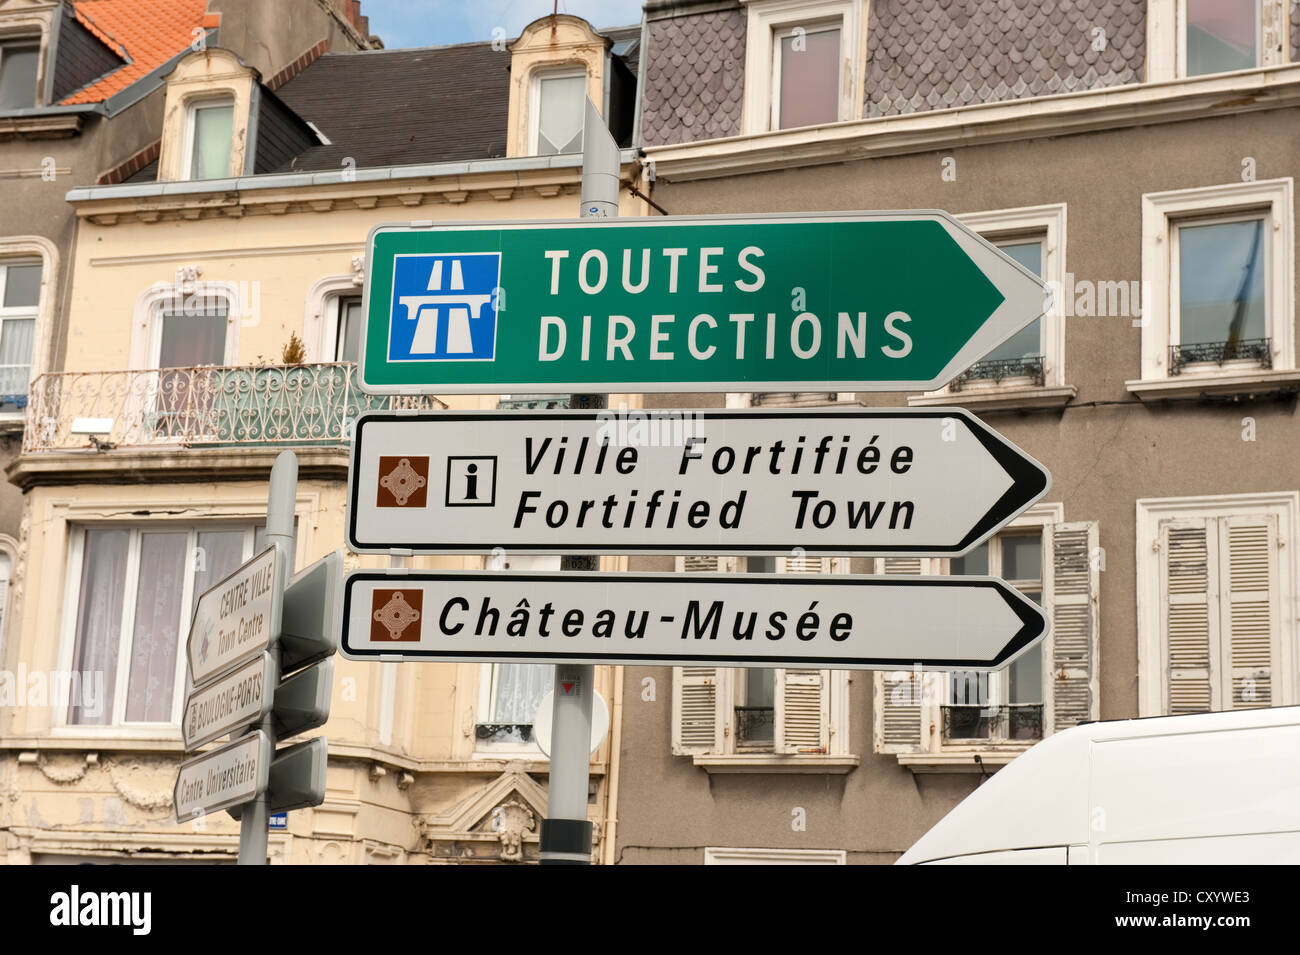 Direction Signs Boulogne-Sur-Mer France Europe Stock Photo